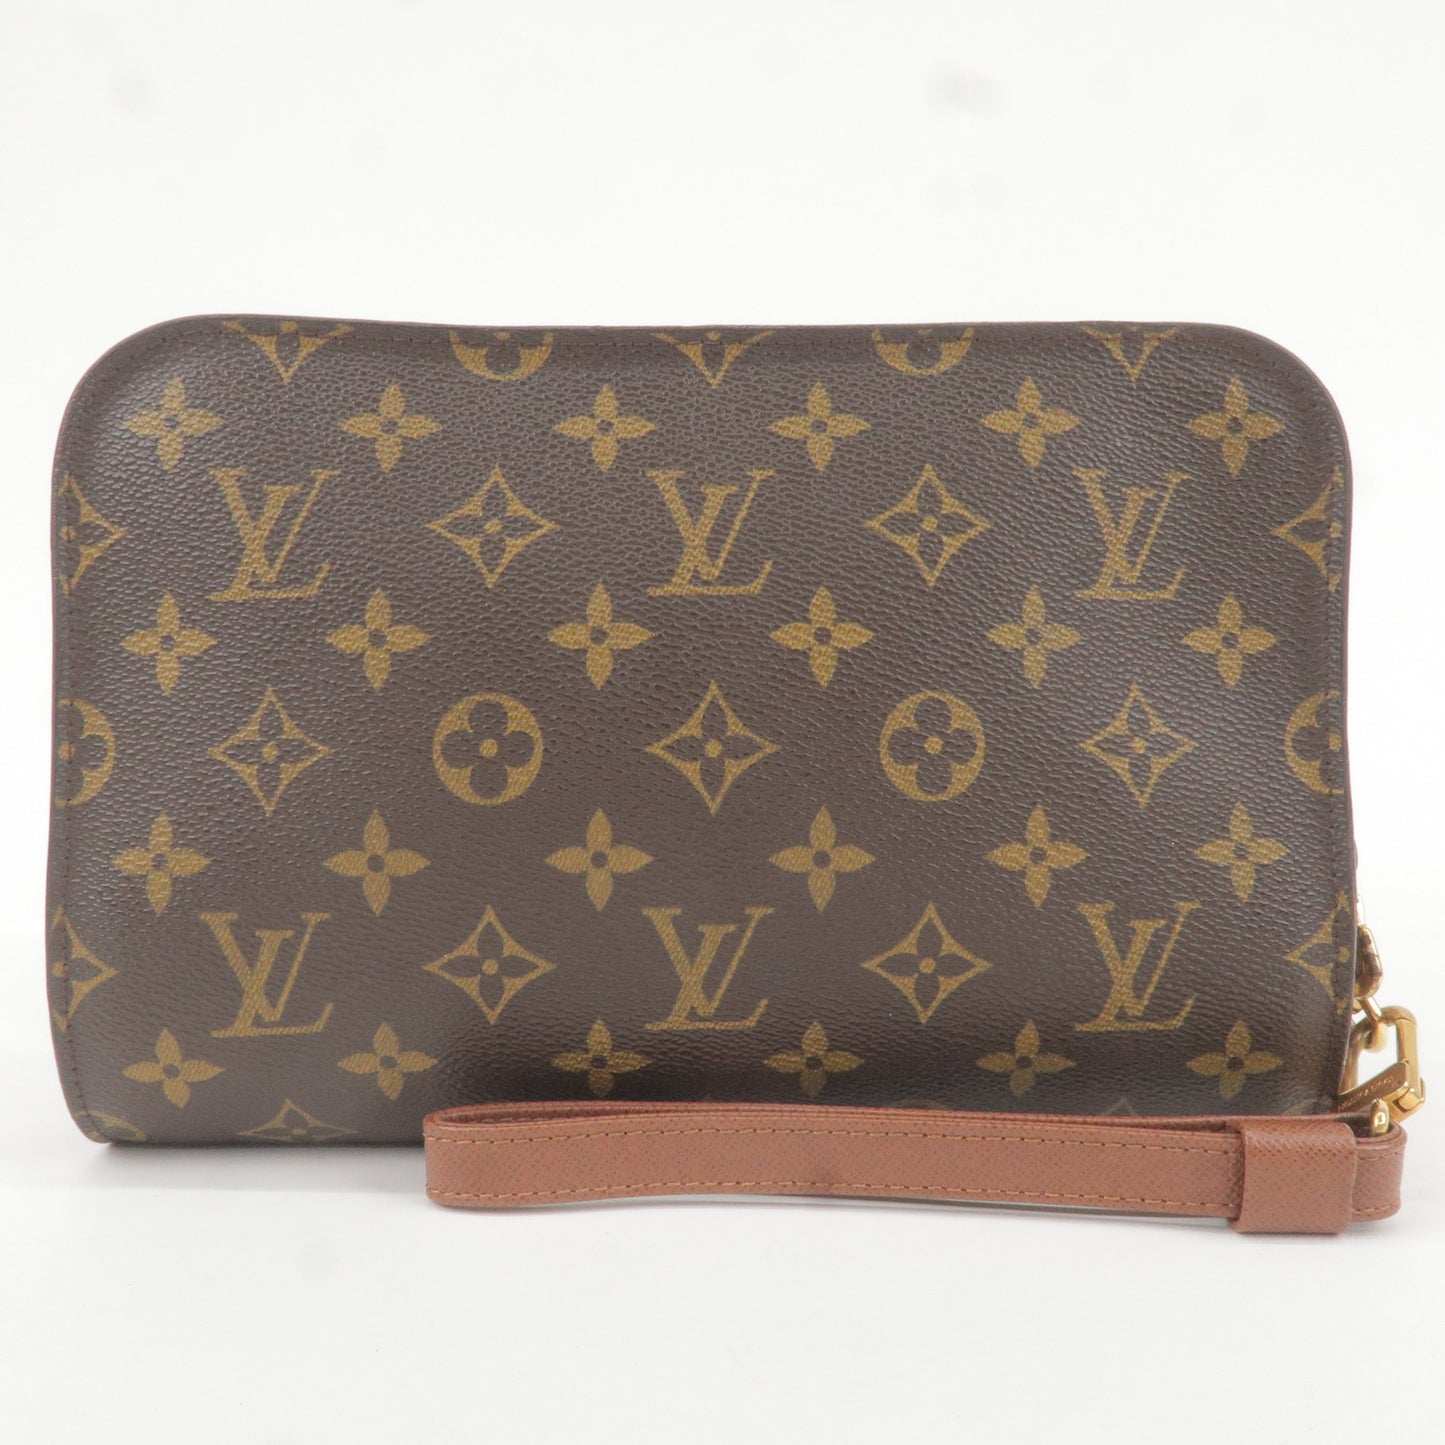 Louis Vuitton 2008 pre-owned Camouflage Monogram Carry 60 Travel